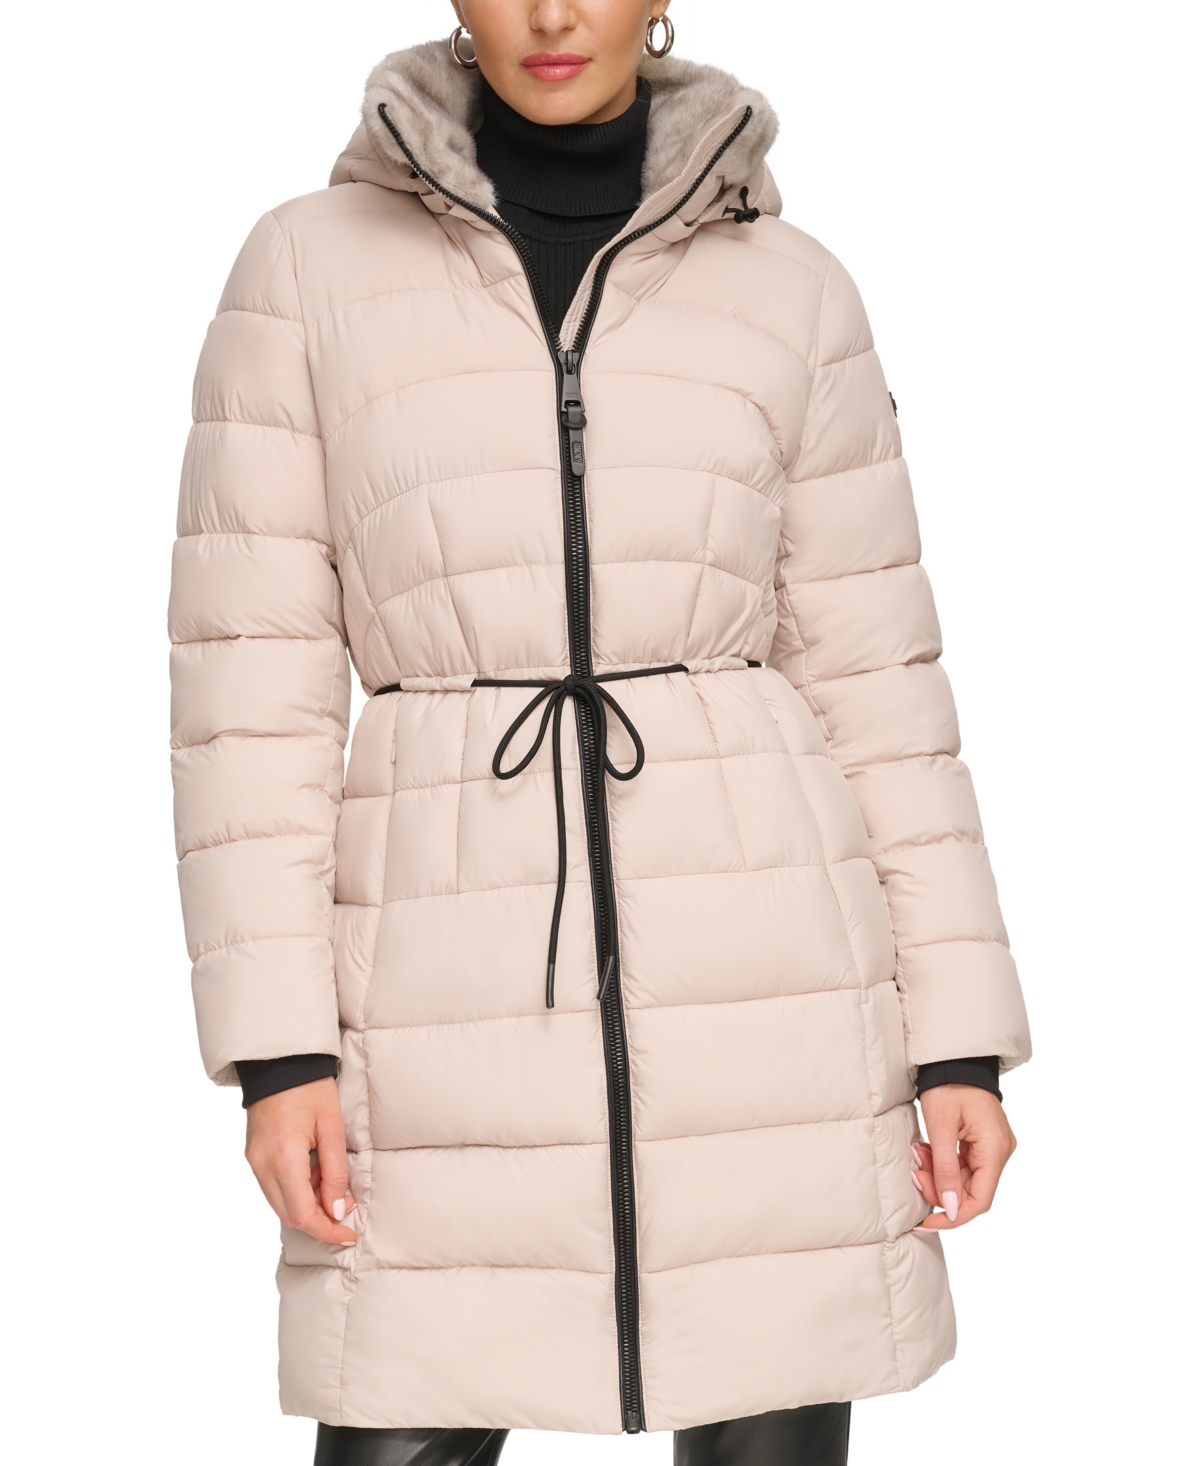 DKNY WOMEN'S ROPE BELTED FAUX-FUR-TRIM HOODED PUFFER COAT